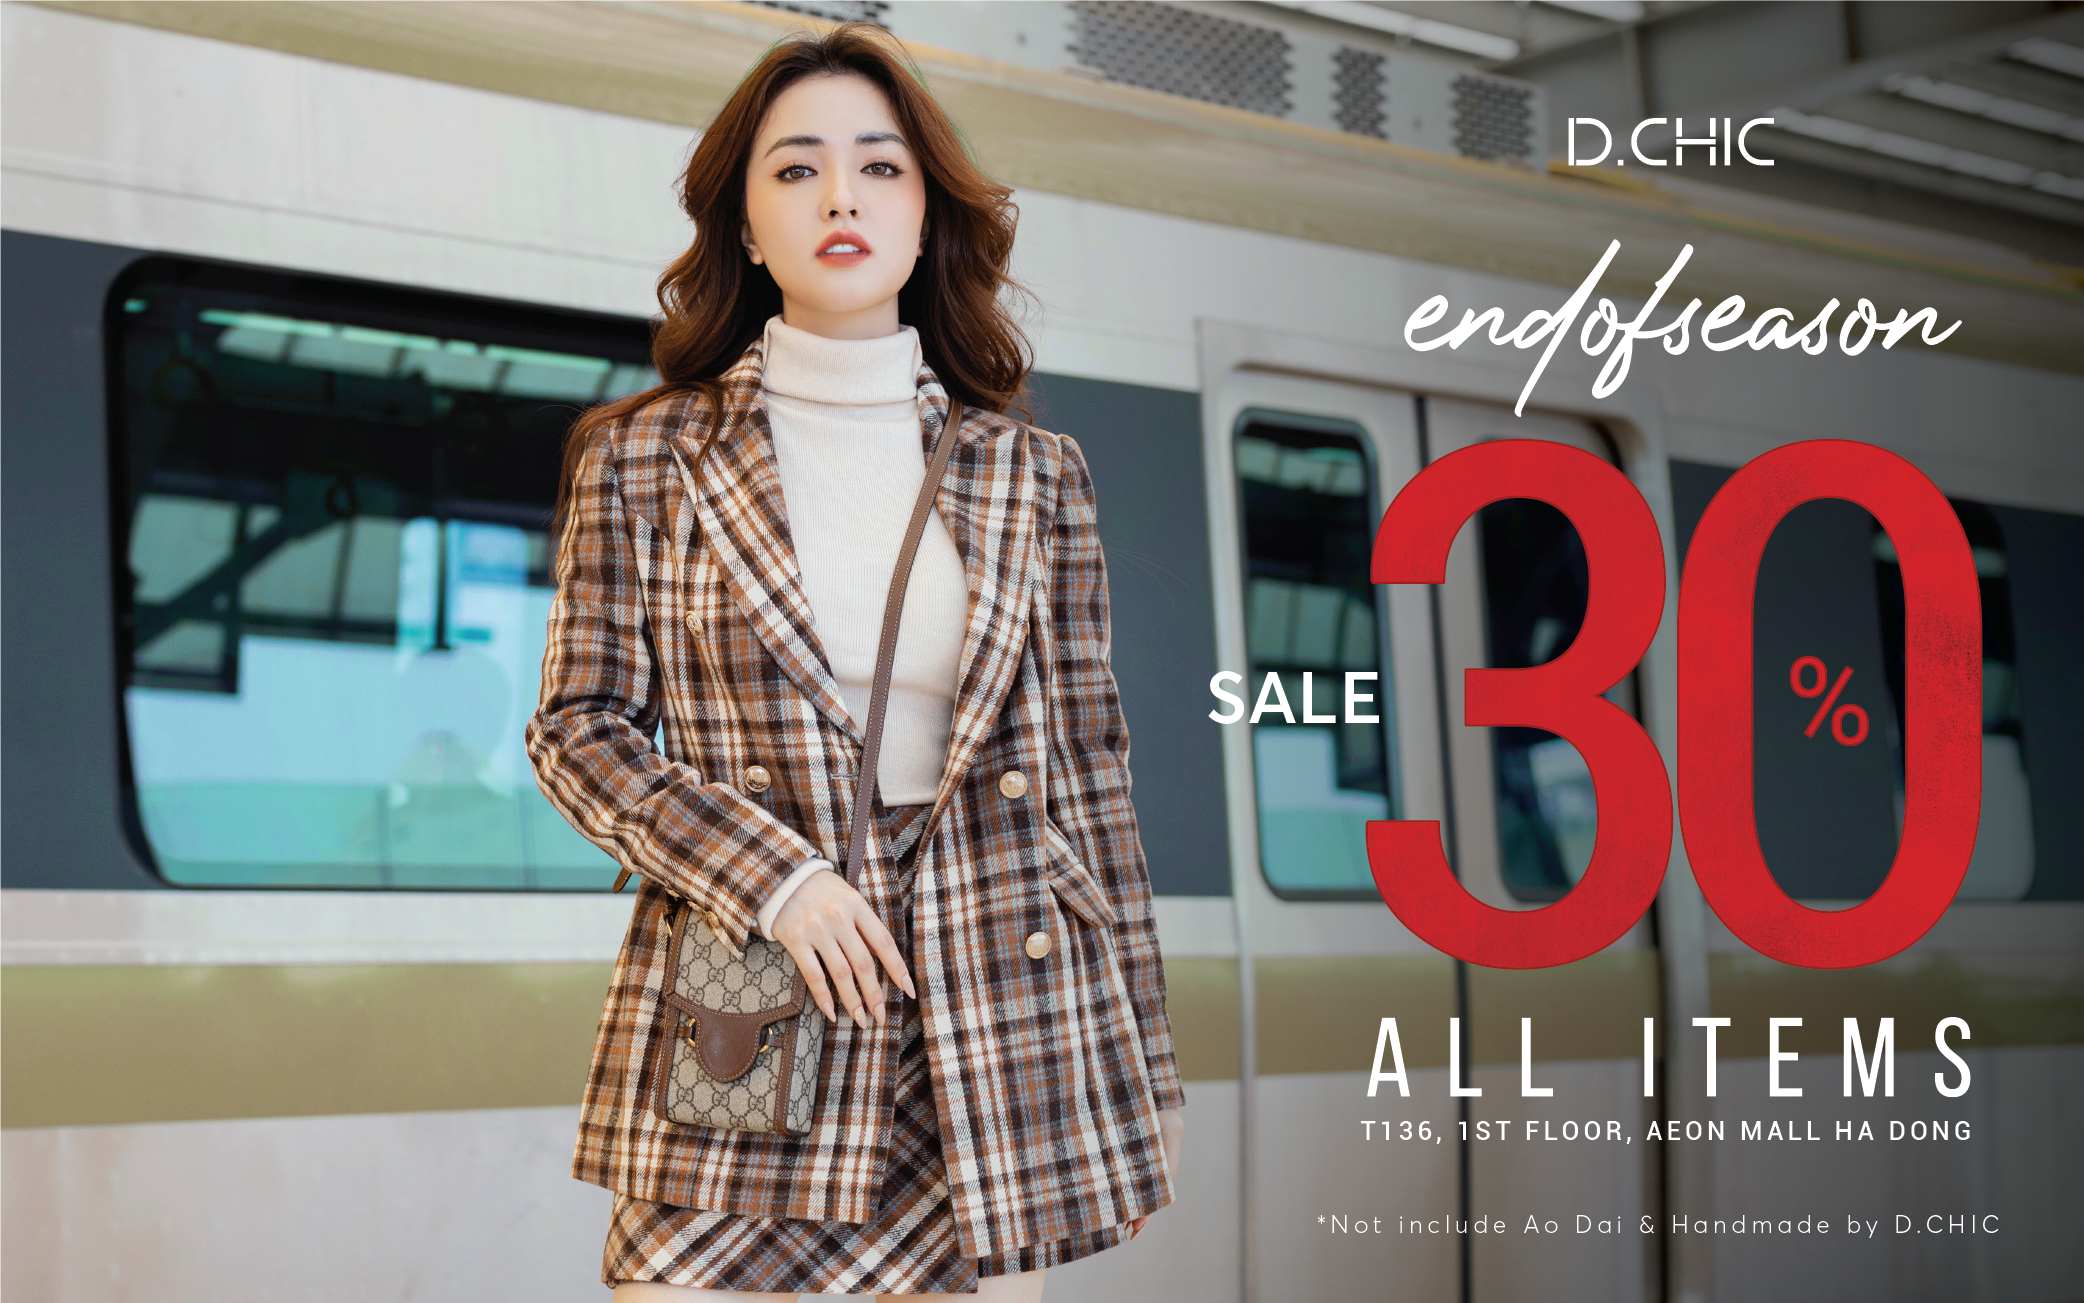 end-of-season-sale-from-1301-discount-30-allitems-excepted-ao-dai-handmade-by-dchic-5808083